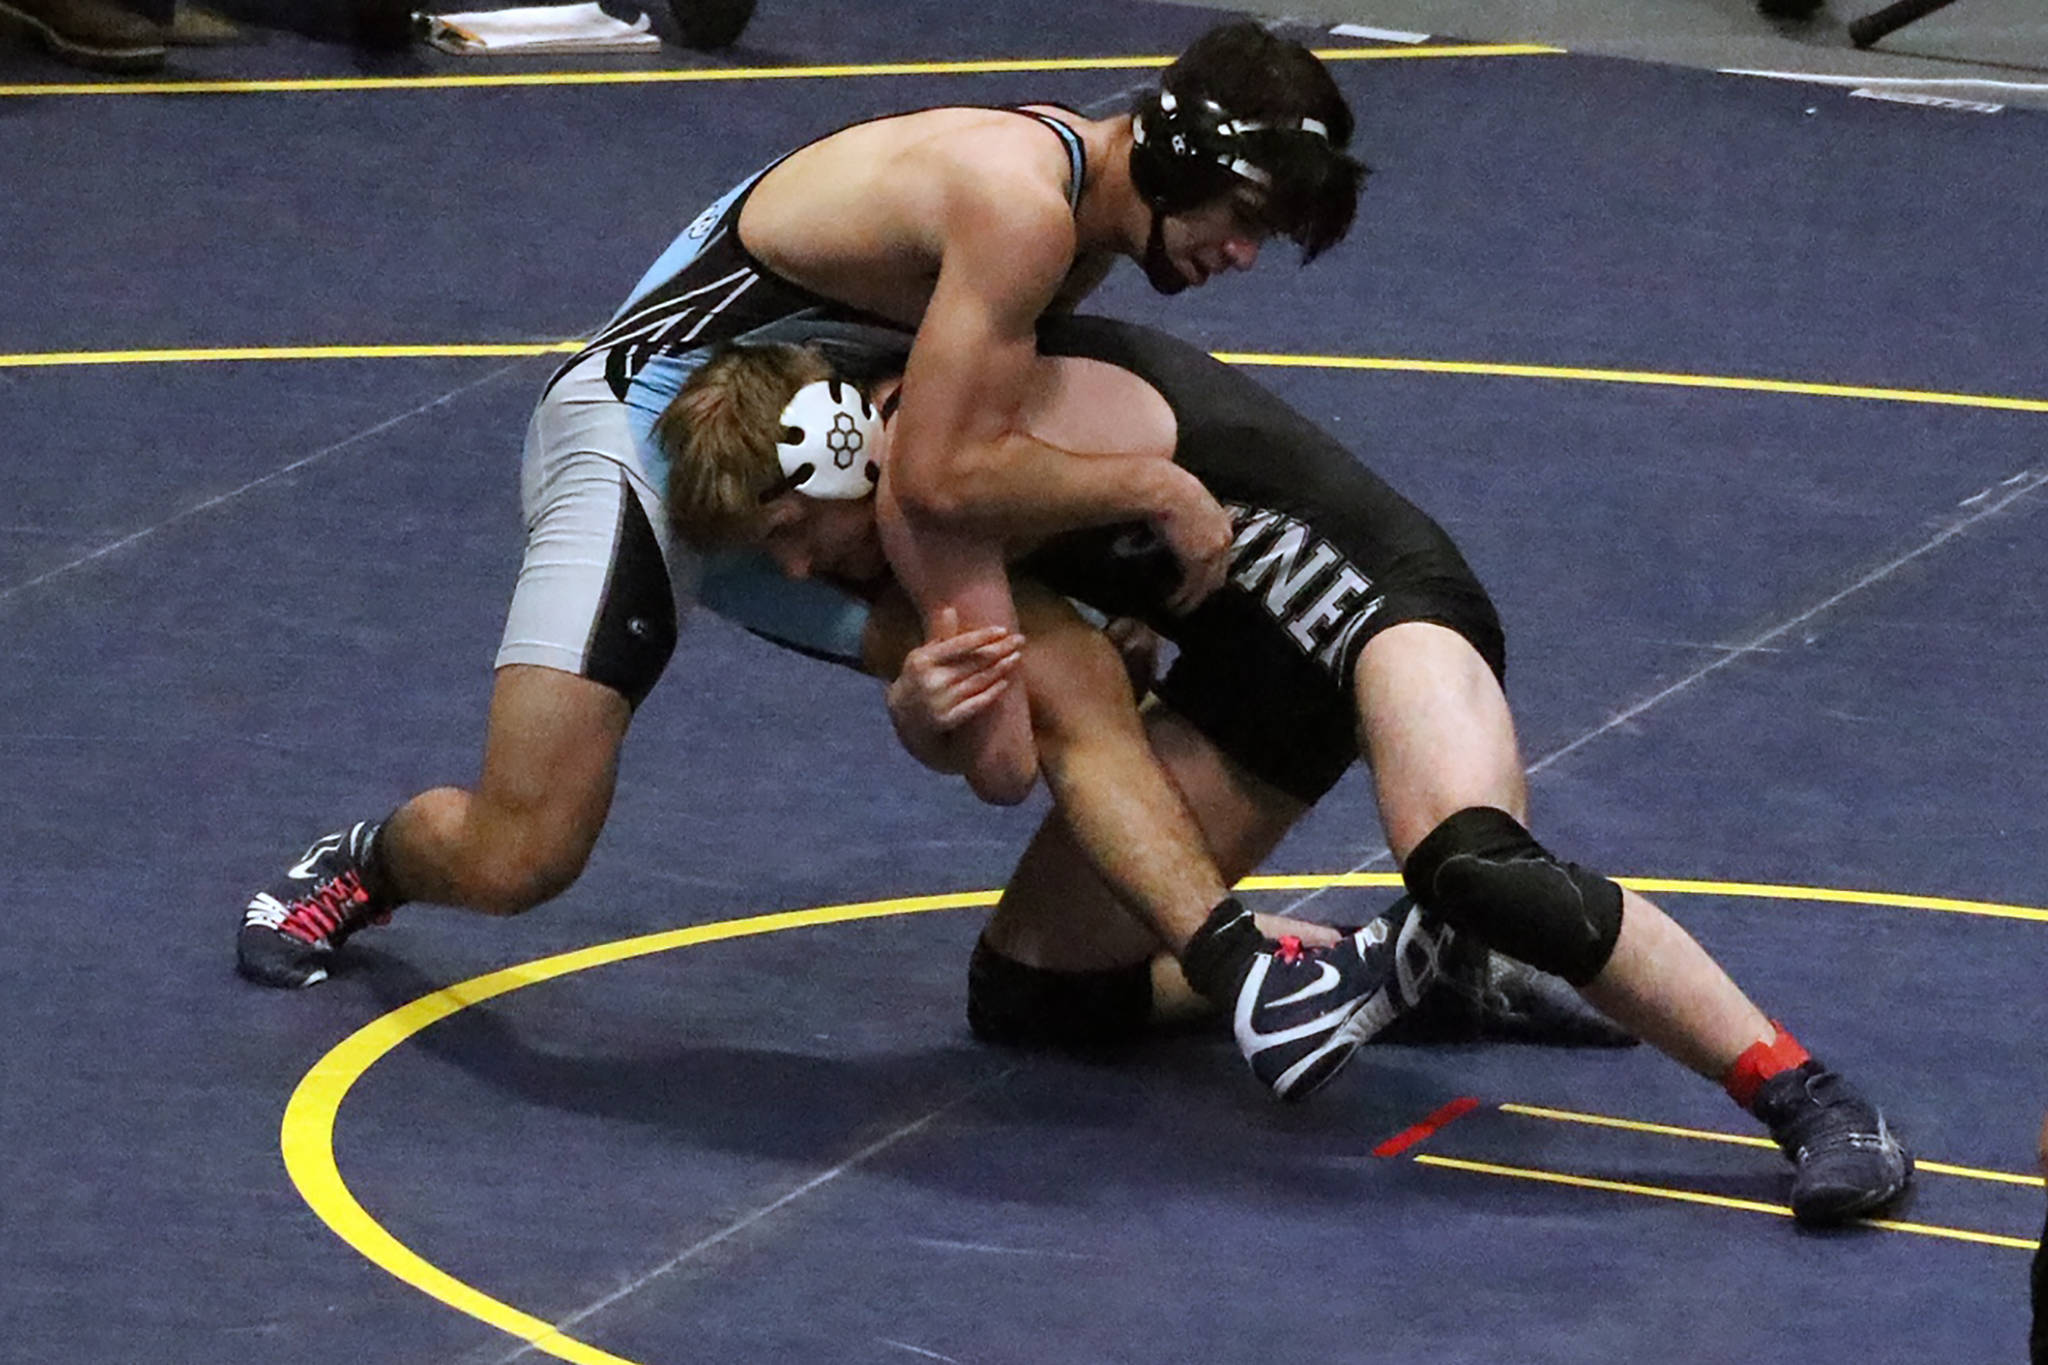 Thunder Mountain High School senior Nick Tipton wrestles Chugiak High School’s Daniel Niebles in the 189-pound state championship match at the ASAA Division I state meet at the Alaska Airlines Center in Anchorage on Saturday, Dec. 22, 2019. Tipton lost to Niebles by way of a 10-2 major decision to place second overall in the 189-pound weight class. (Courtesy Photo | Kristie Erickson)